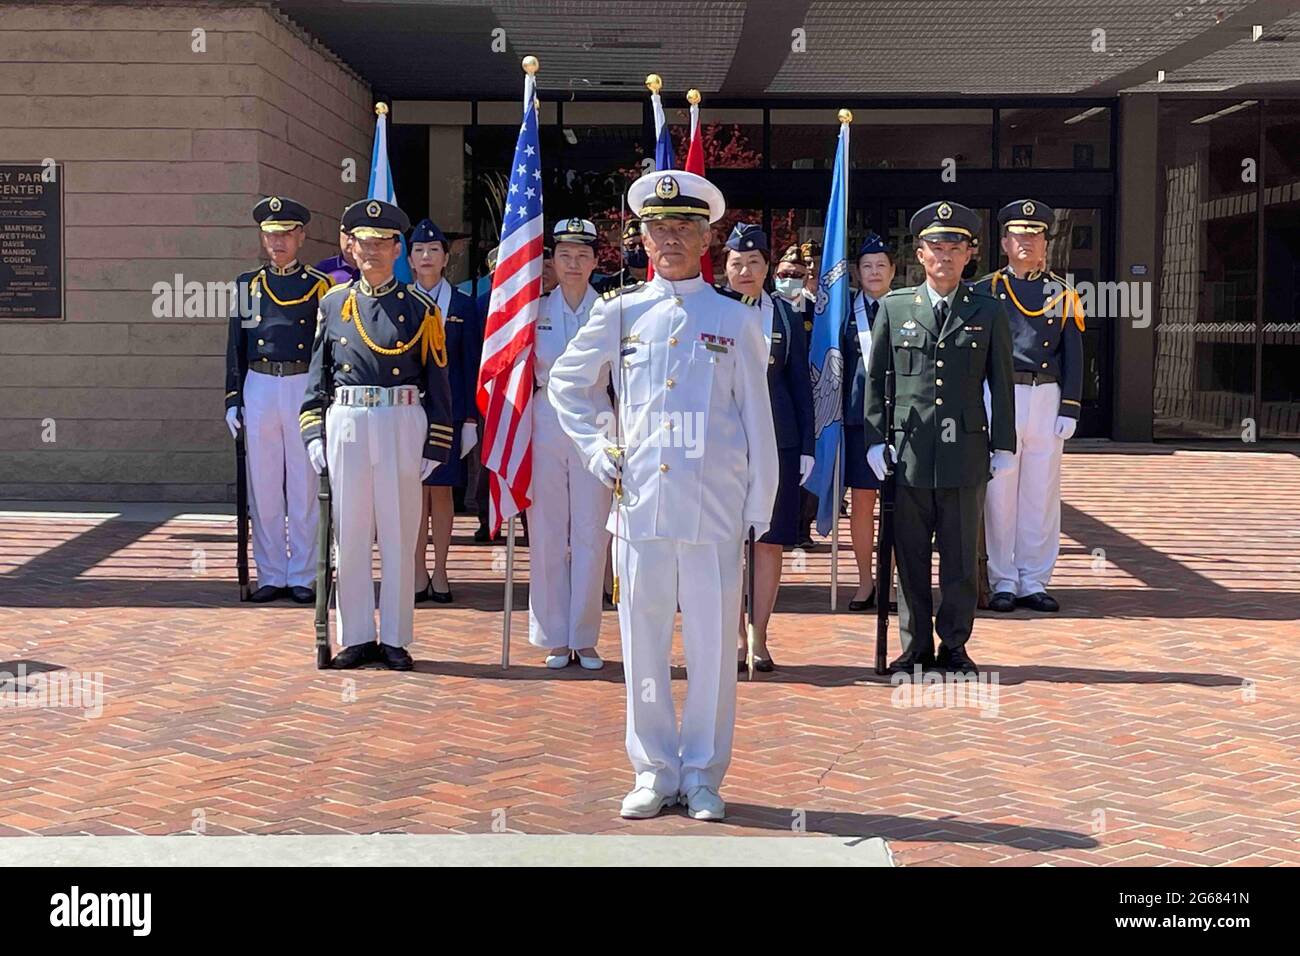 A color guard at ceremony to recognize the 84th anniversary of the Marco Polo Bridge Incident, Saturday, July 3, 2021, at the Monterey Park Civic Cent Stock Photo